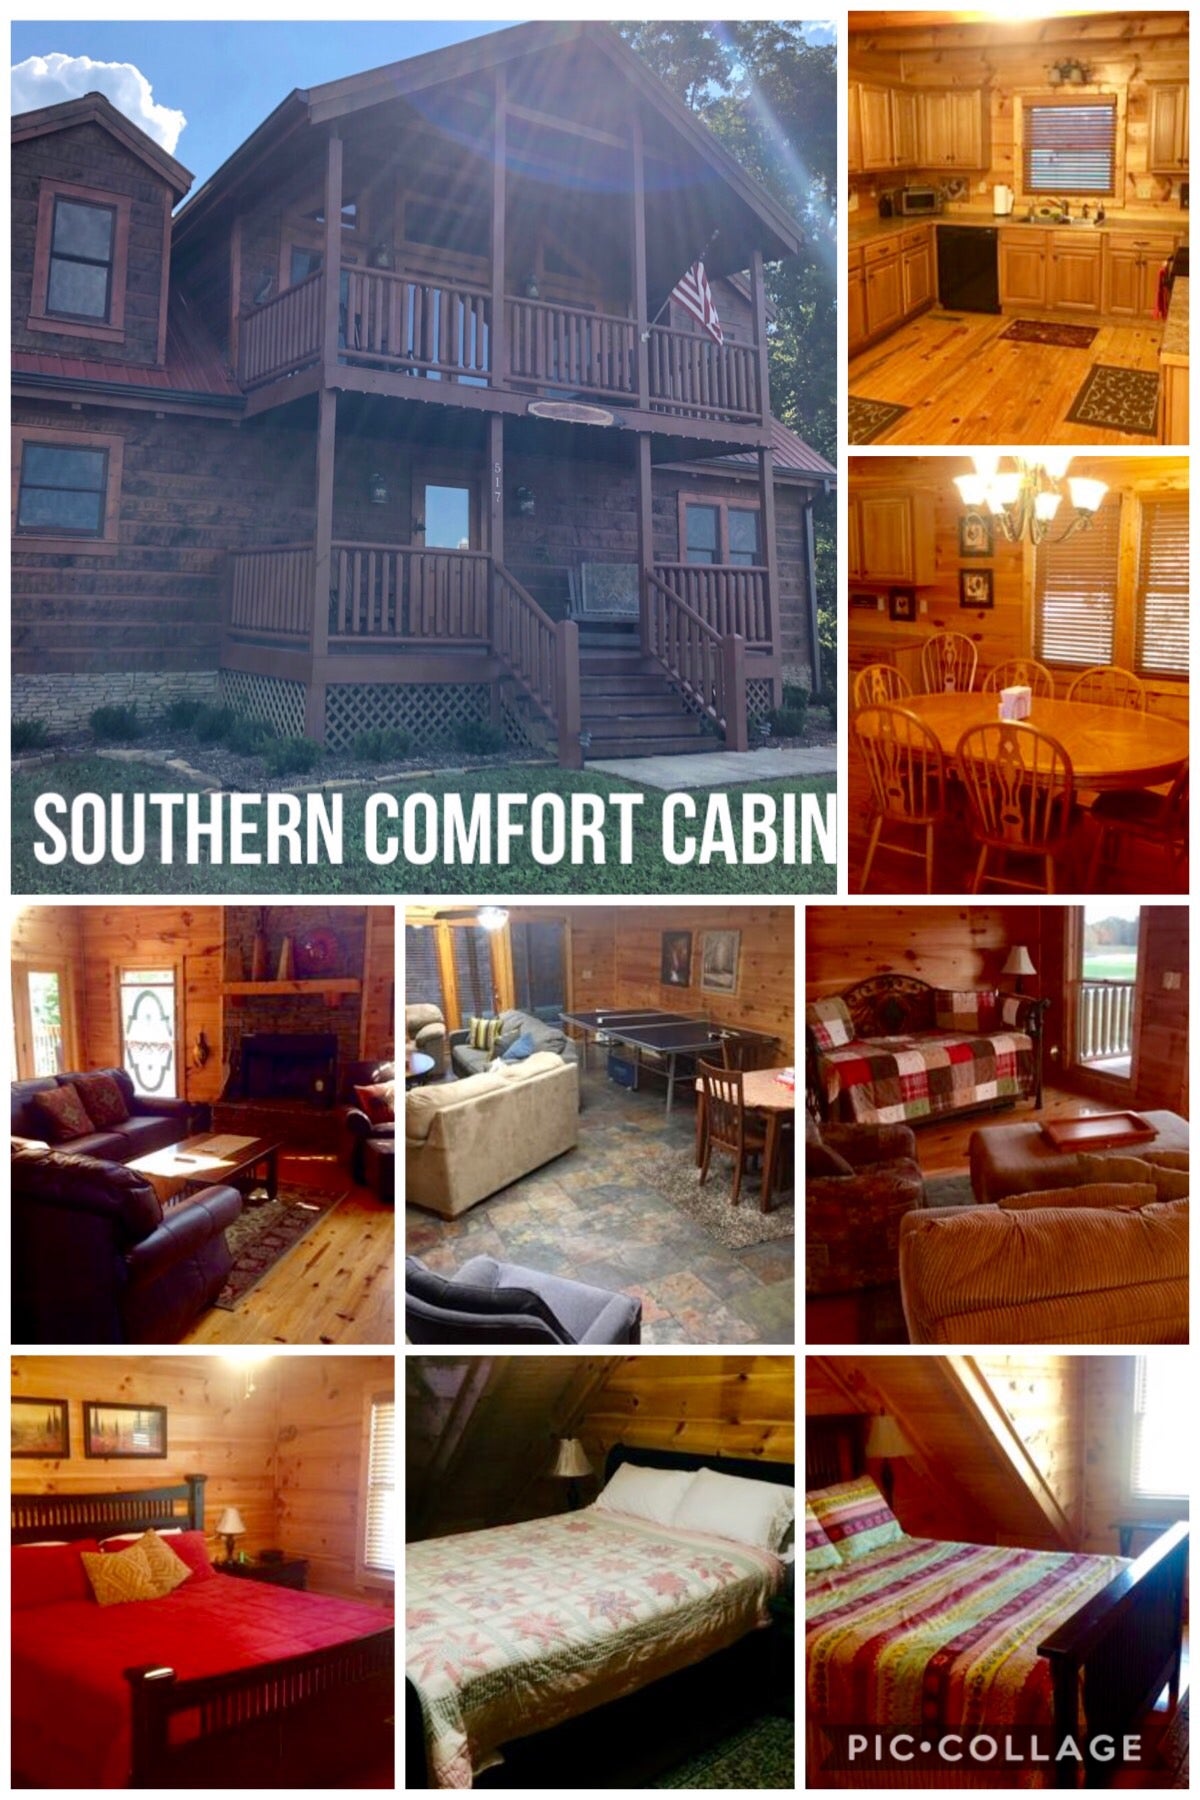 Southern Comfort Cabin